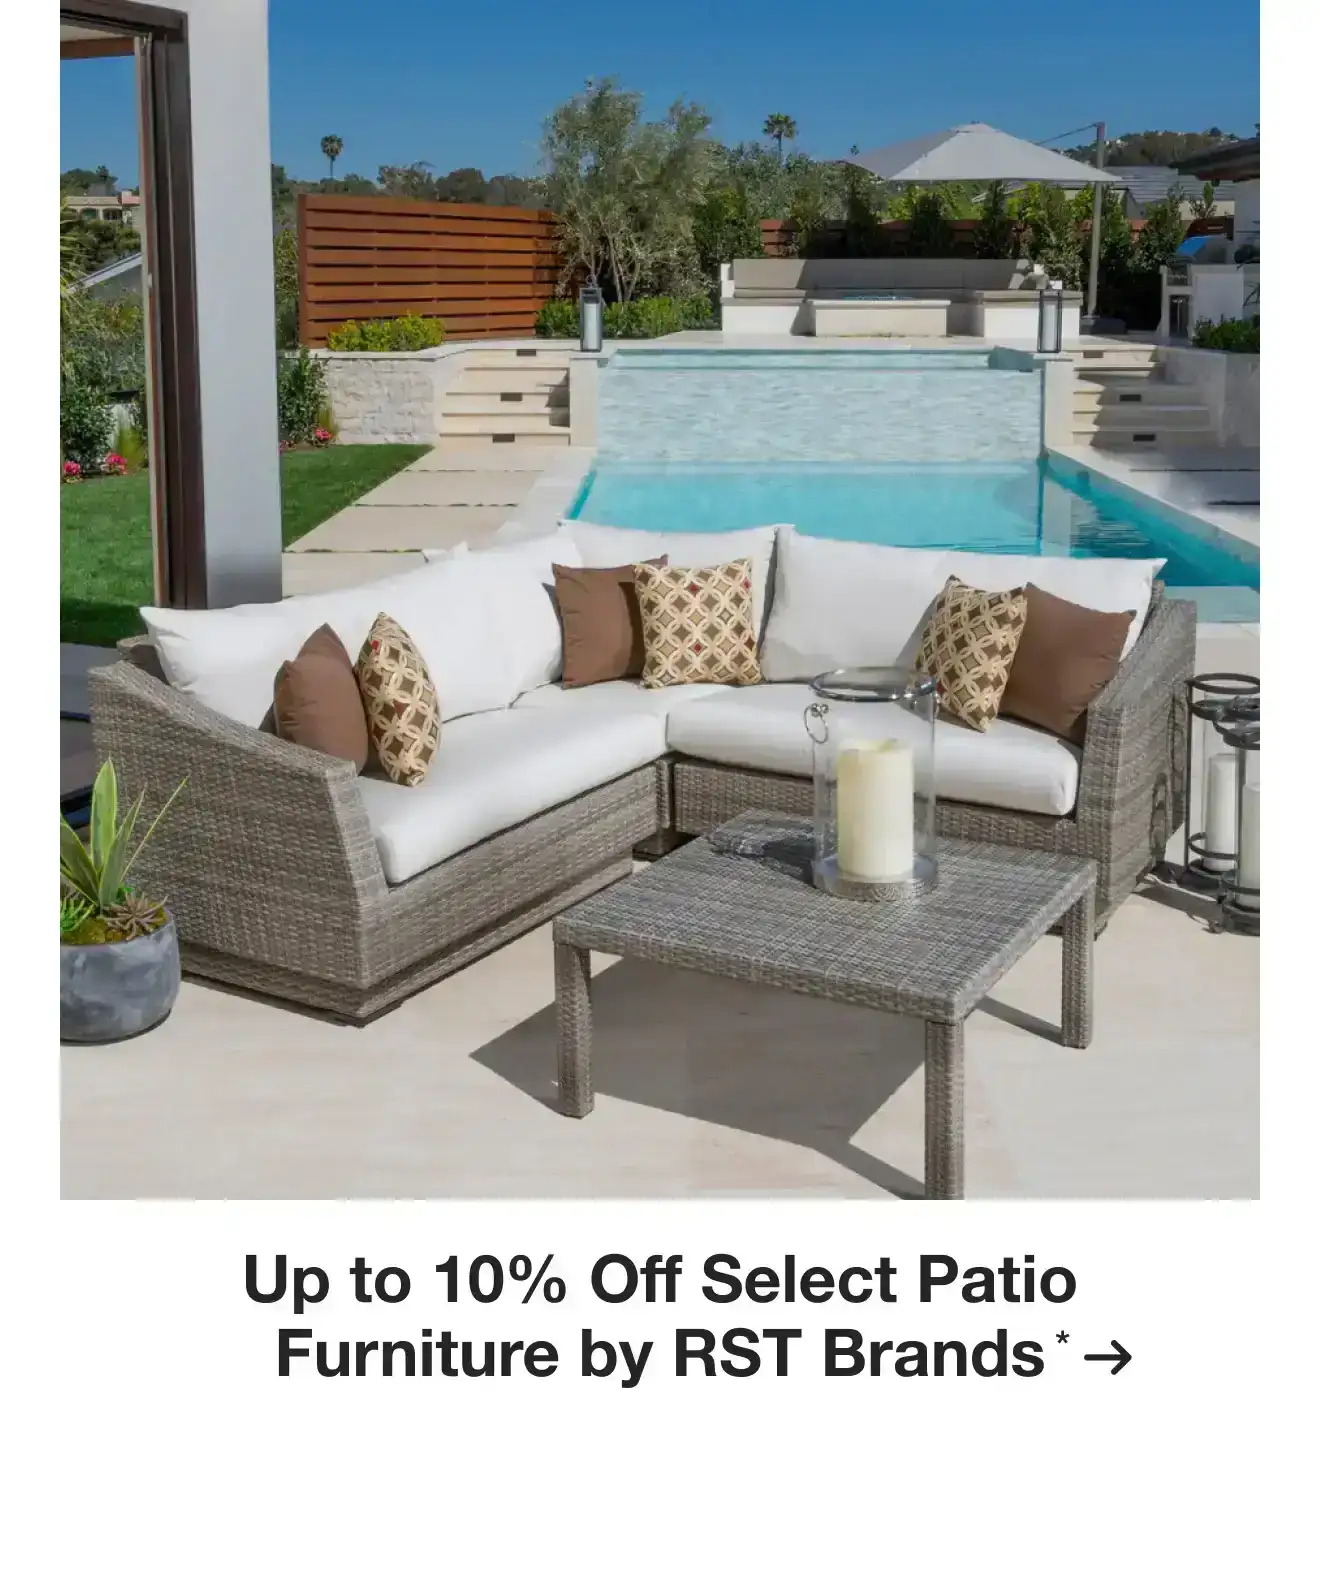 Up to 10% Off Select Patio Furniture by RST Brands*